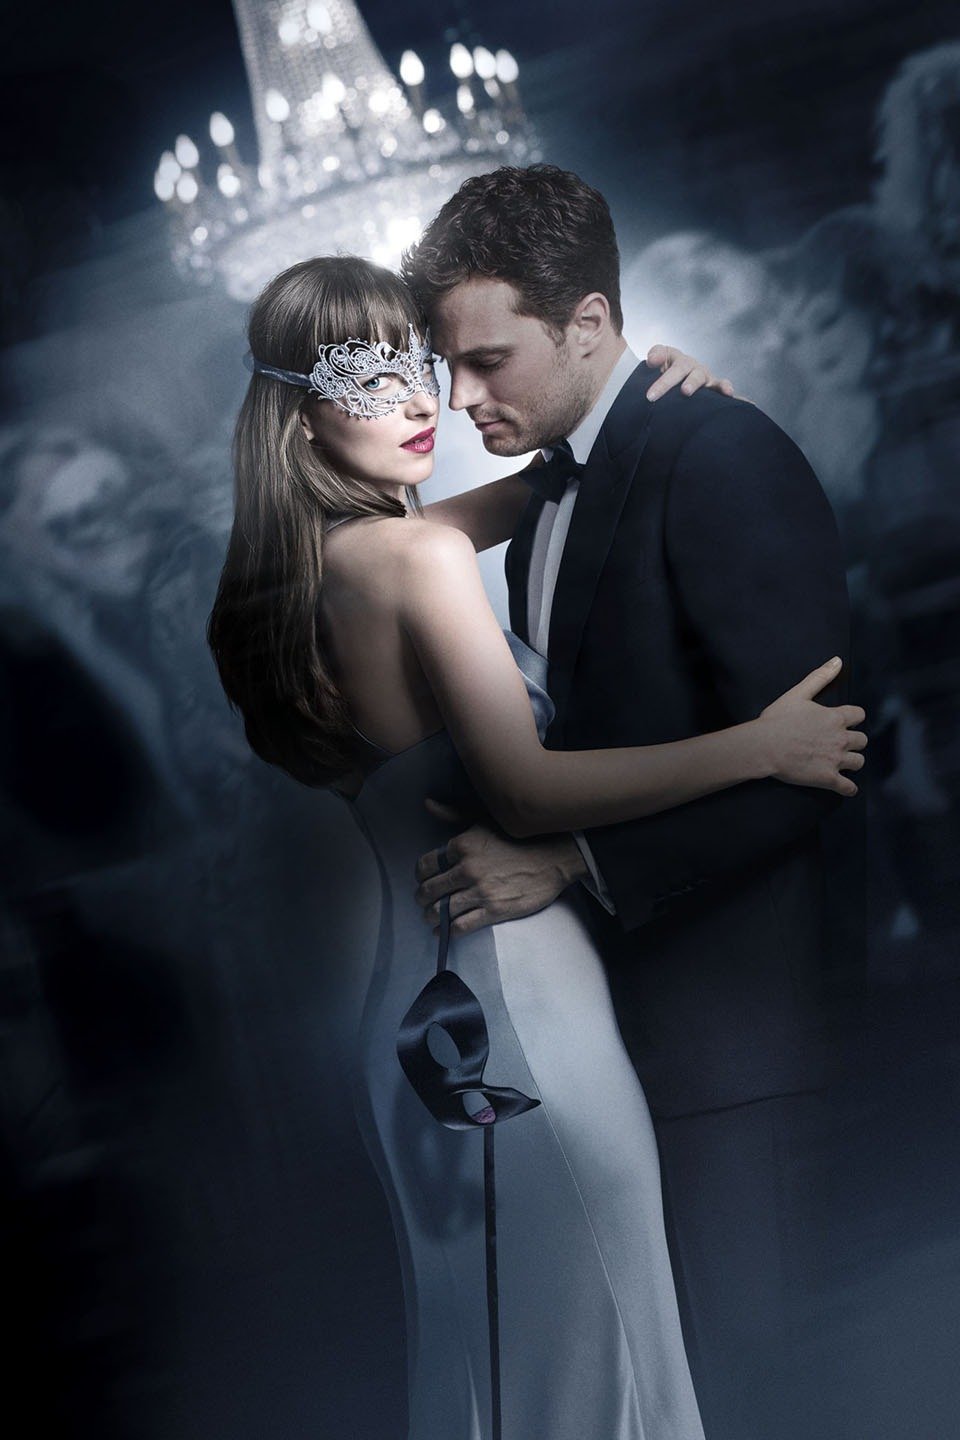 Fifty Shades Of Grey 4 Fifty Shades Darker - Rotten Tomatoes